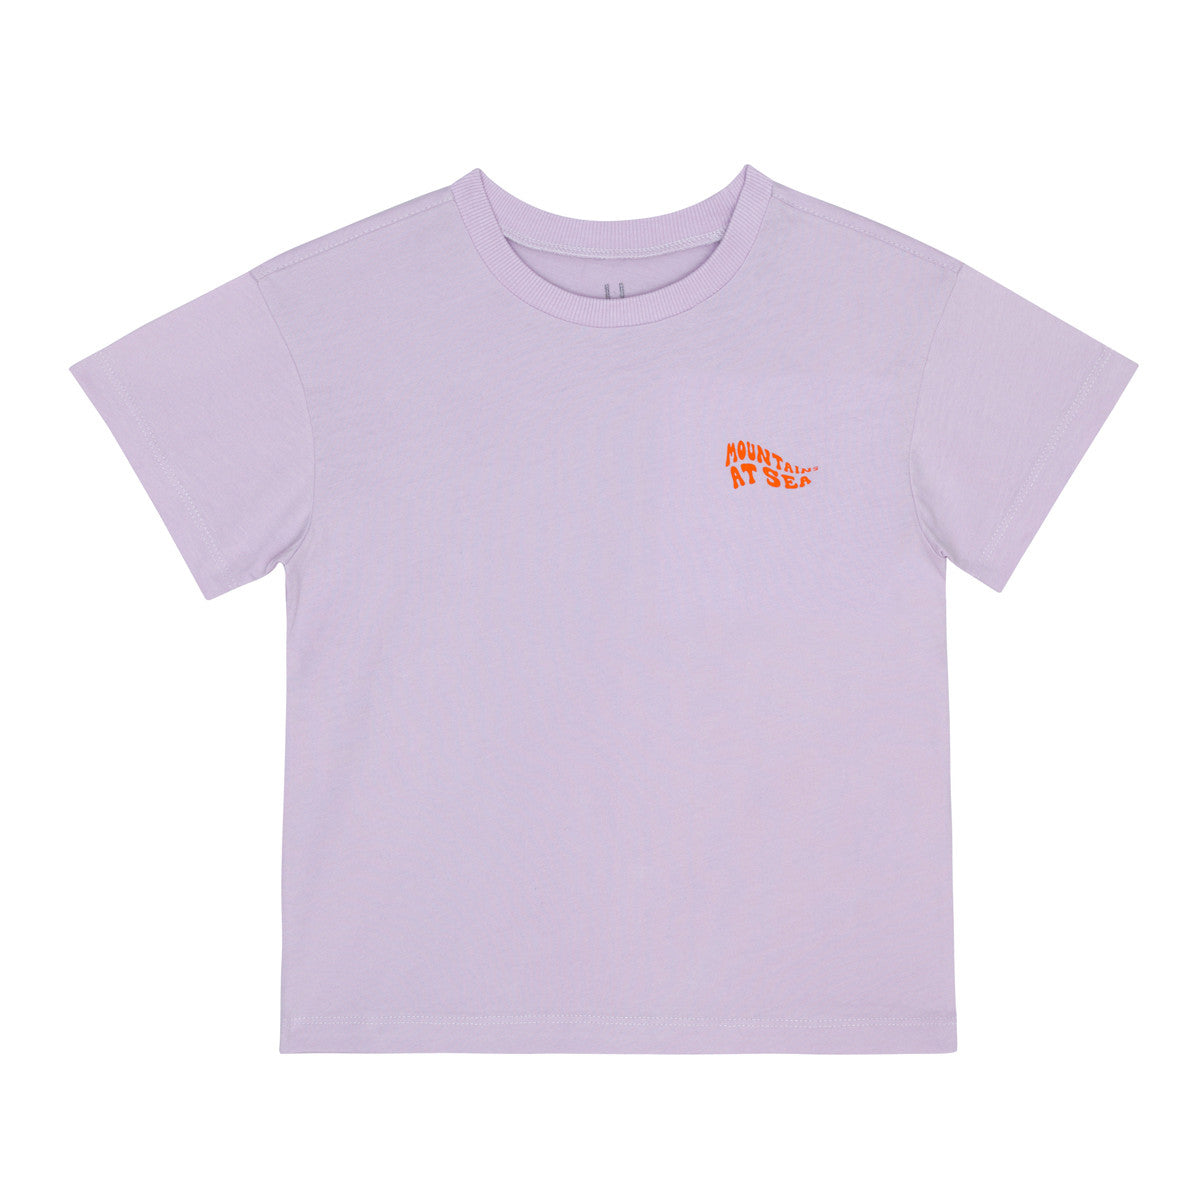 Little Hedonist round neck shirt with print on the front in lavender fog for boys and girls. For this shirt we use the best premium organic cotton for light and easy fit! Sustainable kids clothing.